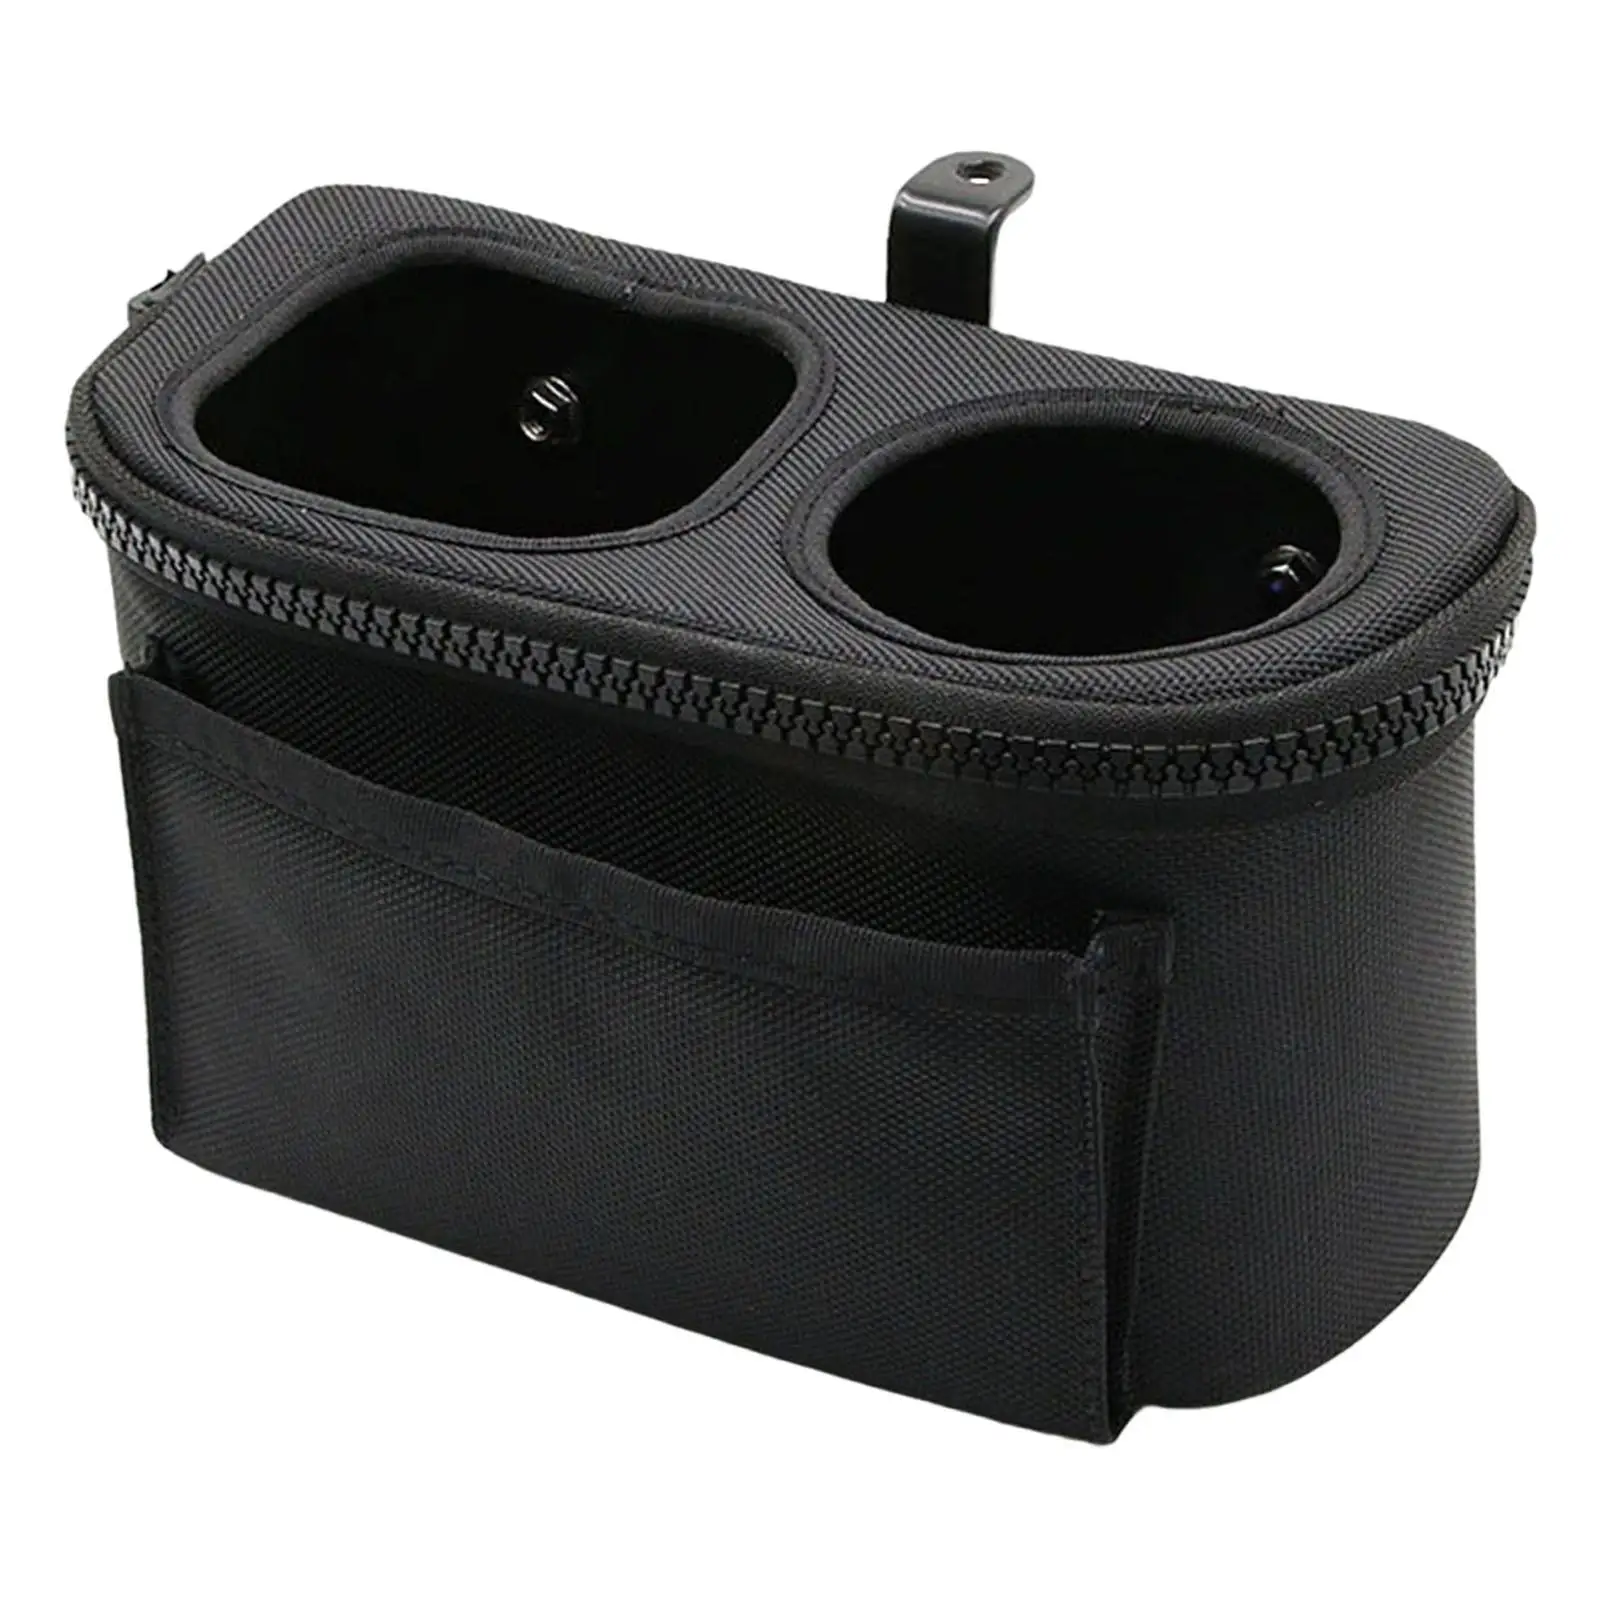 Motorcycle Cup Holder Storage Bag Universal Water Cup Holder for Motorcycle